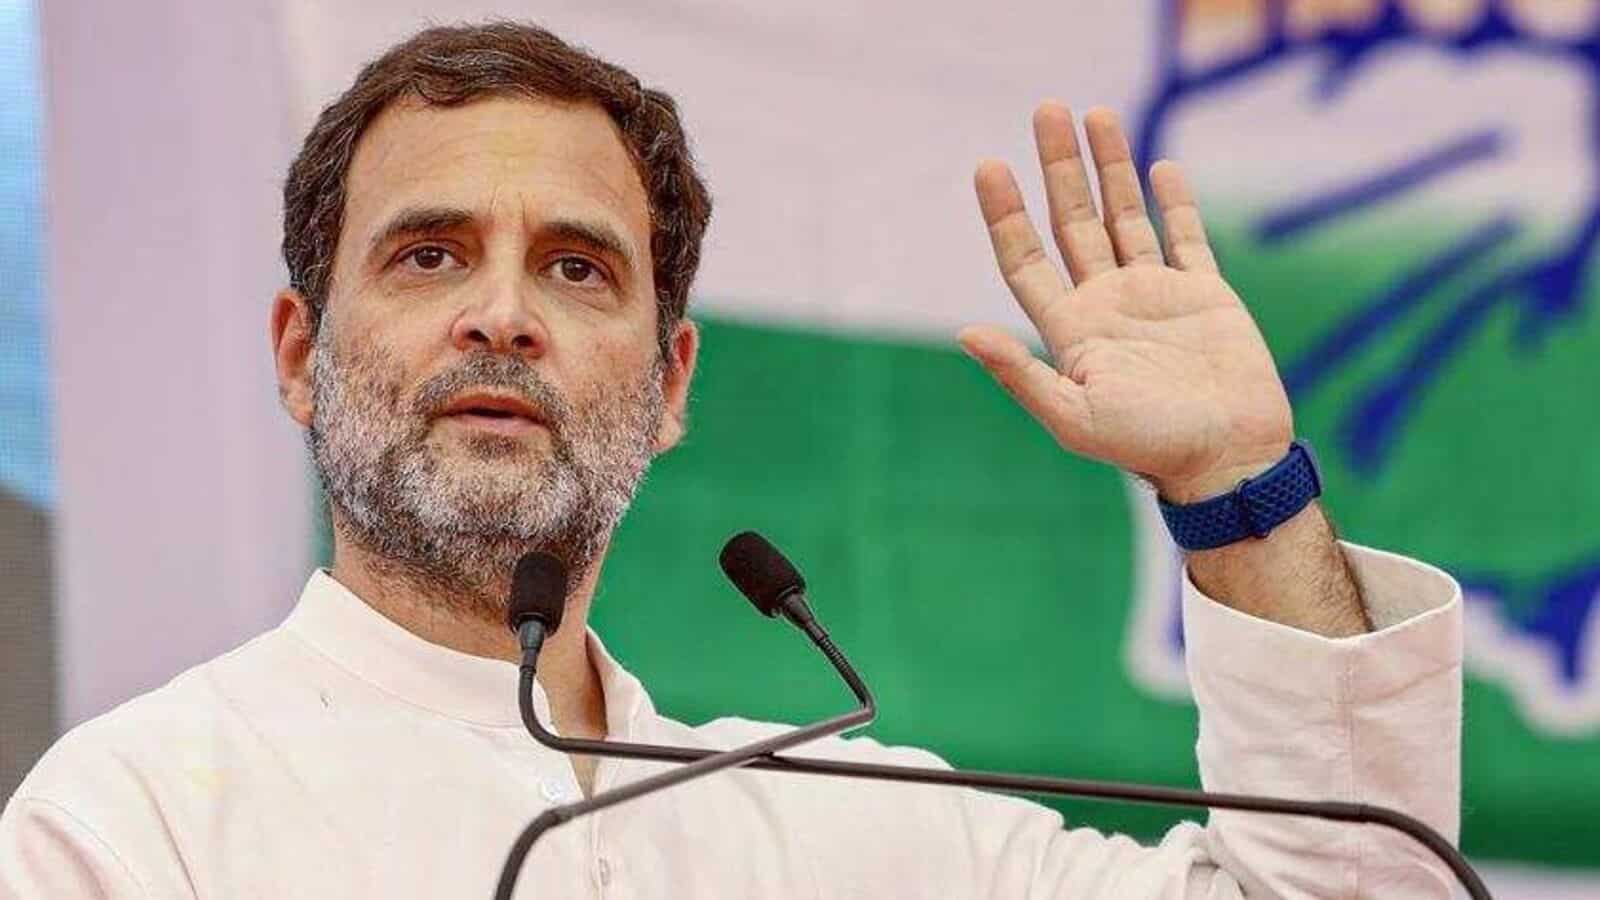 Parliament is not made of bricks of ego, but of constitutional values, says Rahul Gandhi